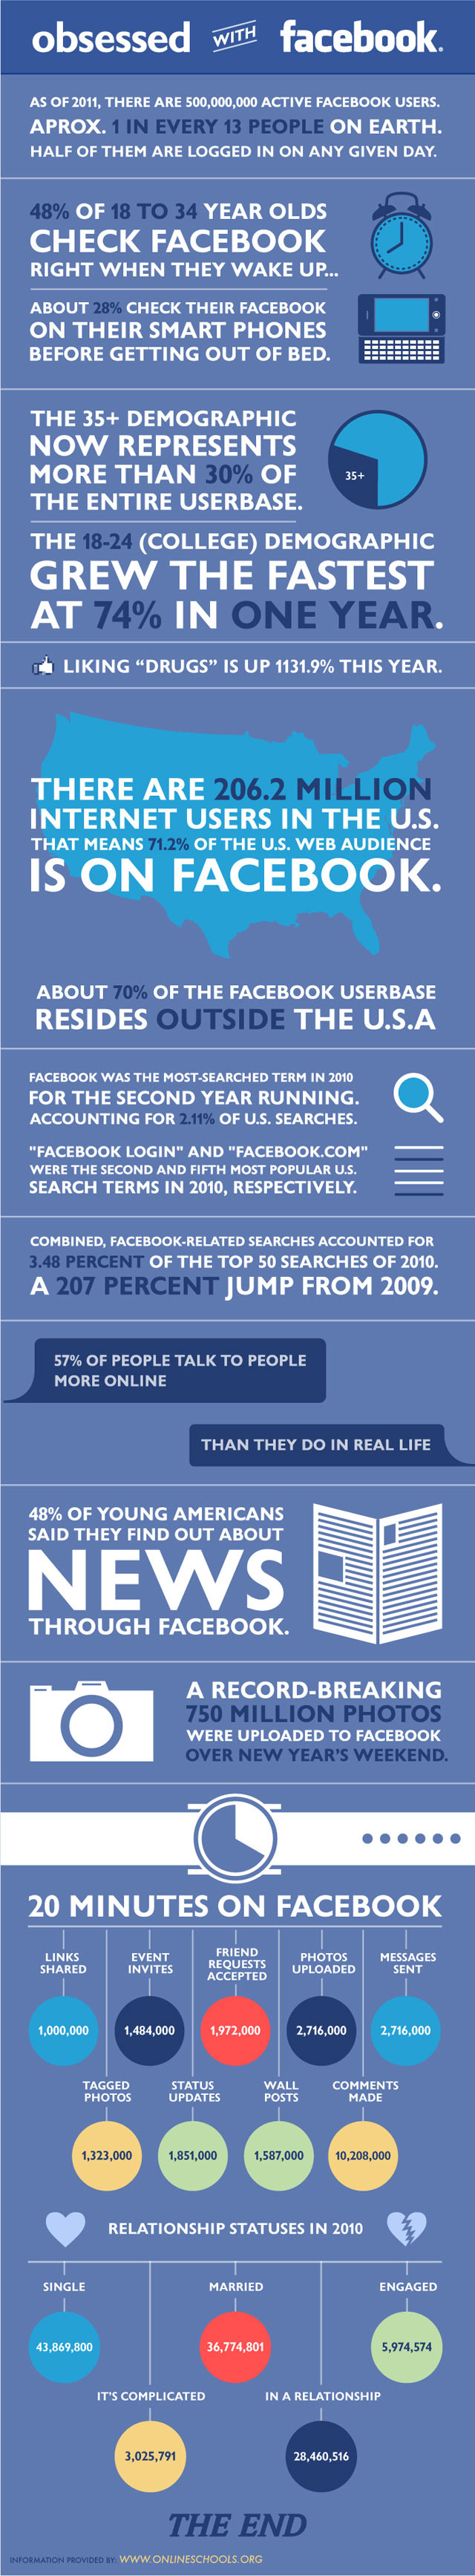 Facebook Obsession [INFOGRAPHIC]